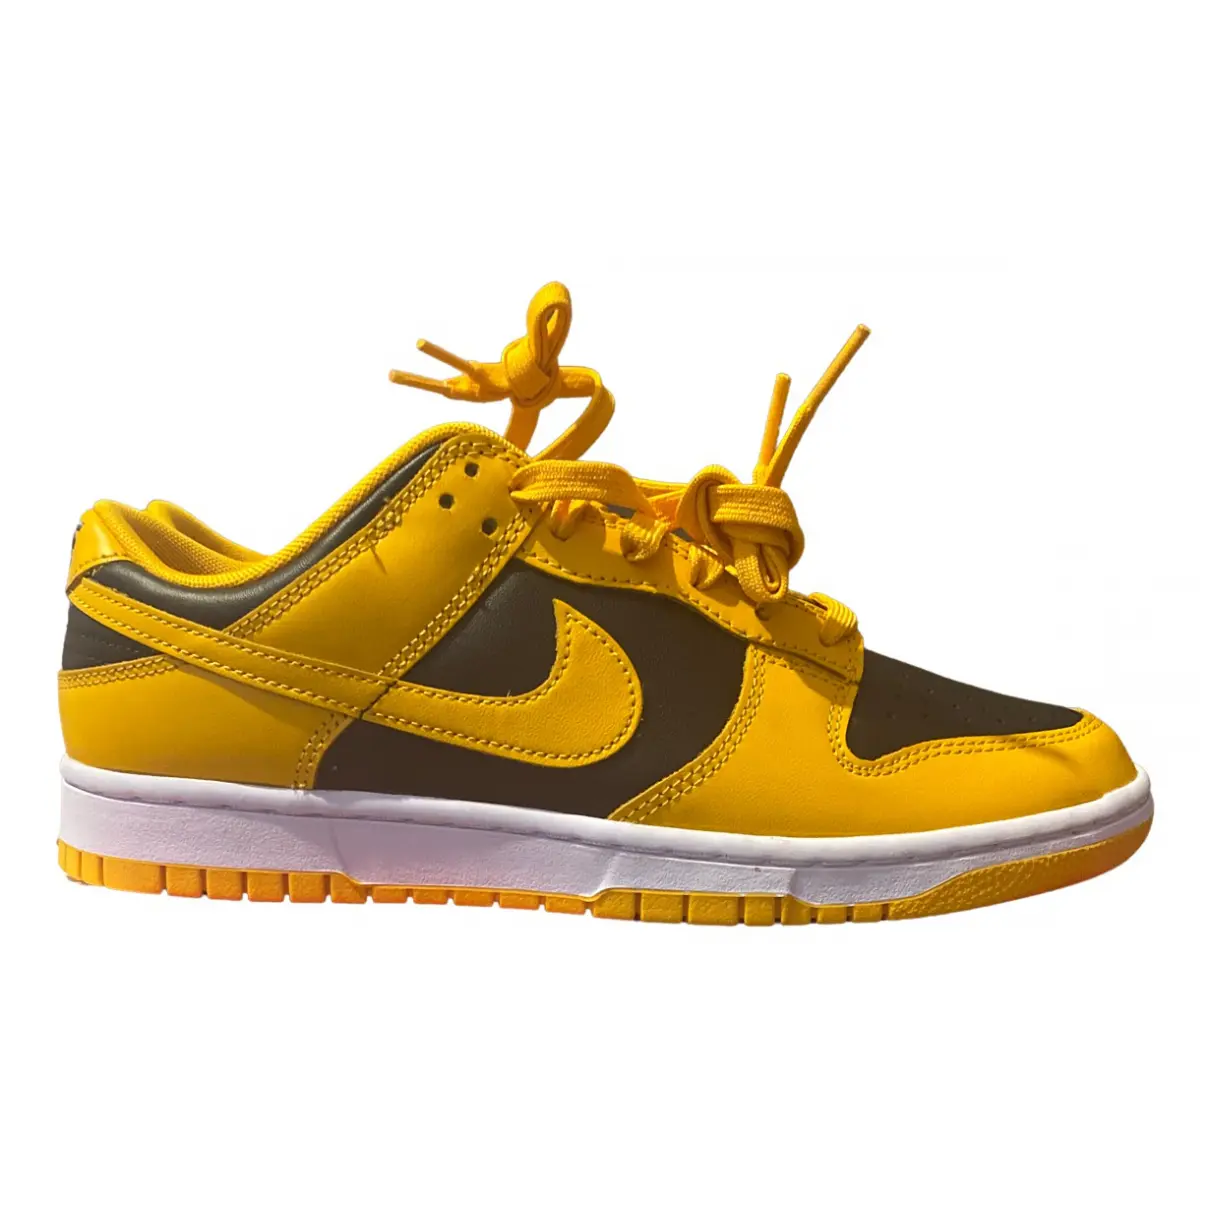 SB Dunk leather low trainers Nike